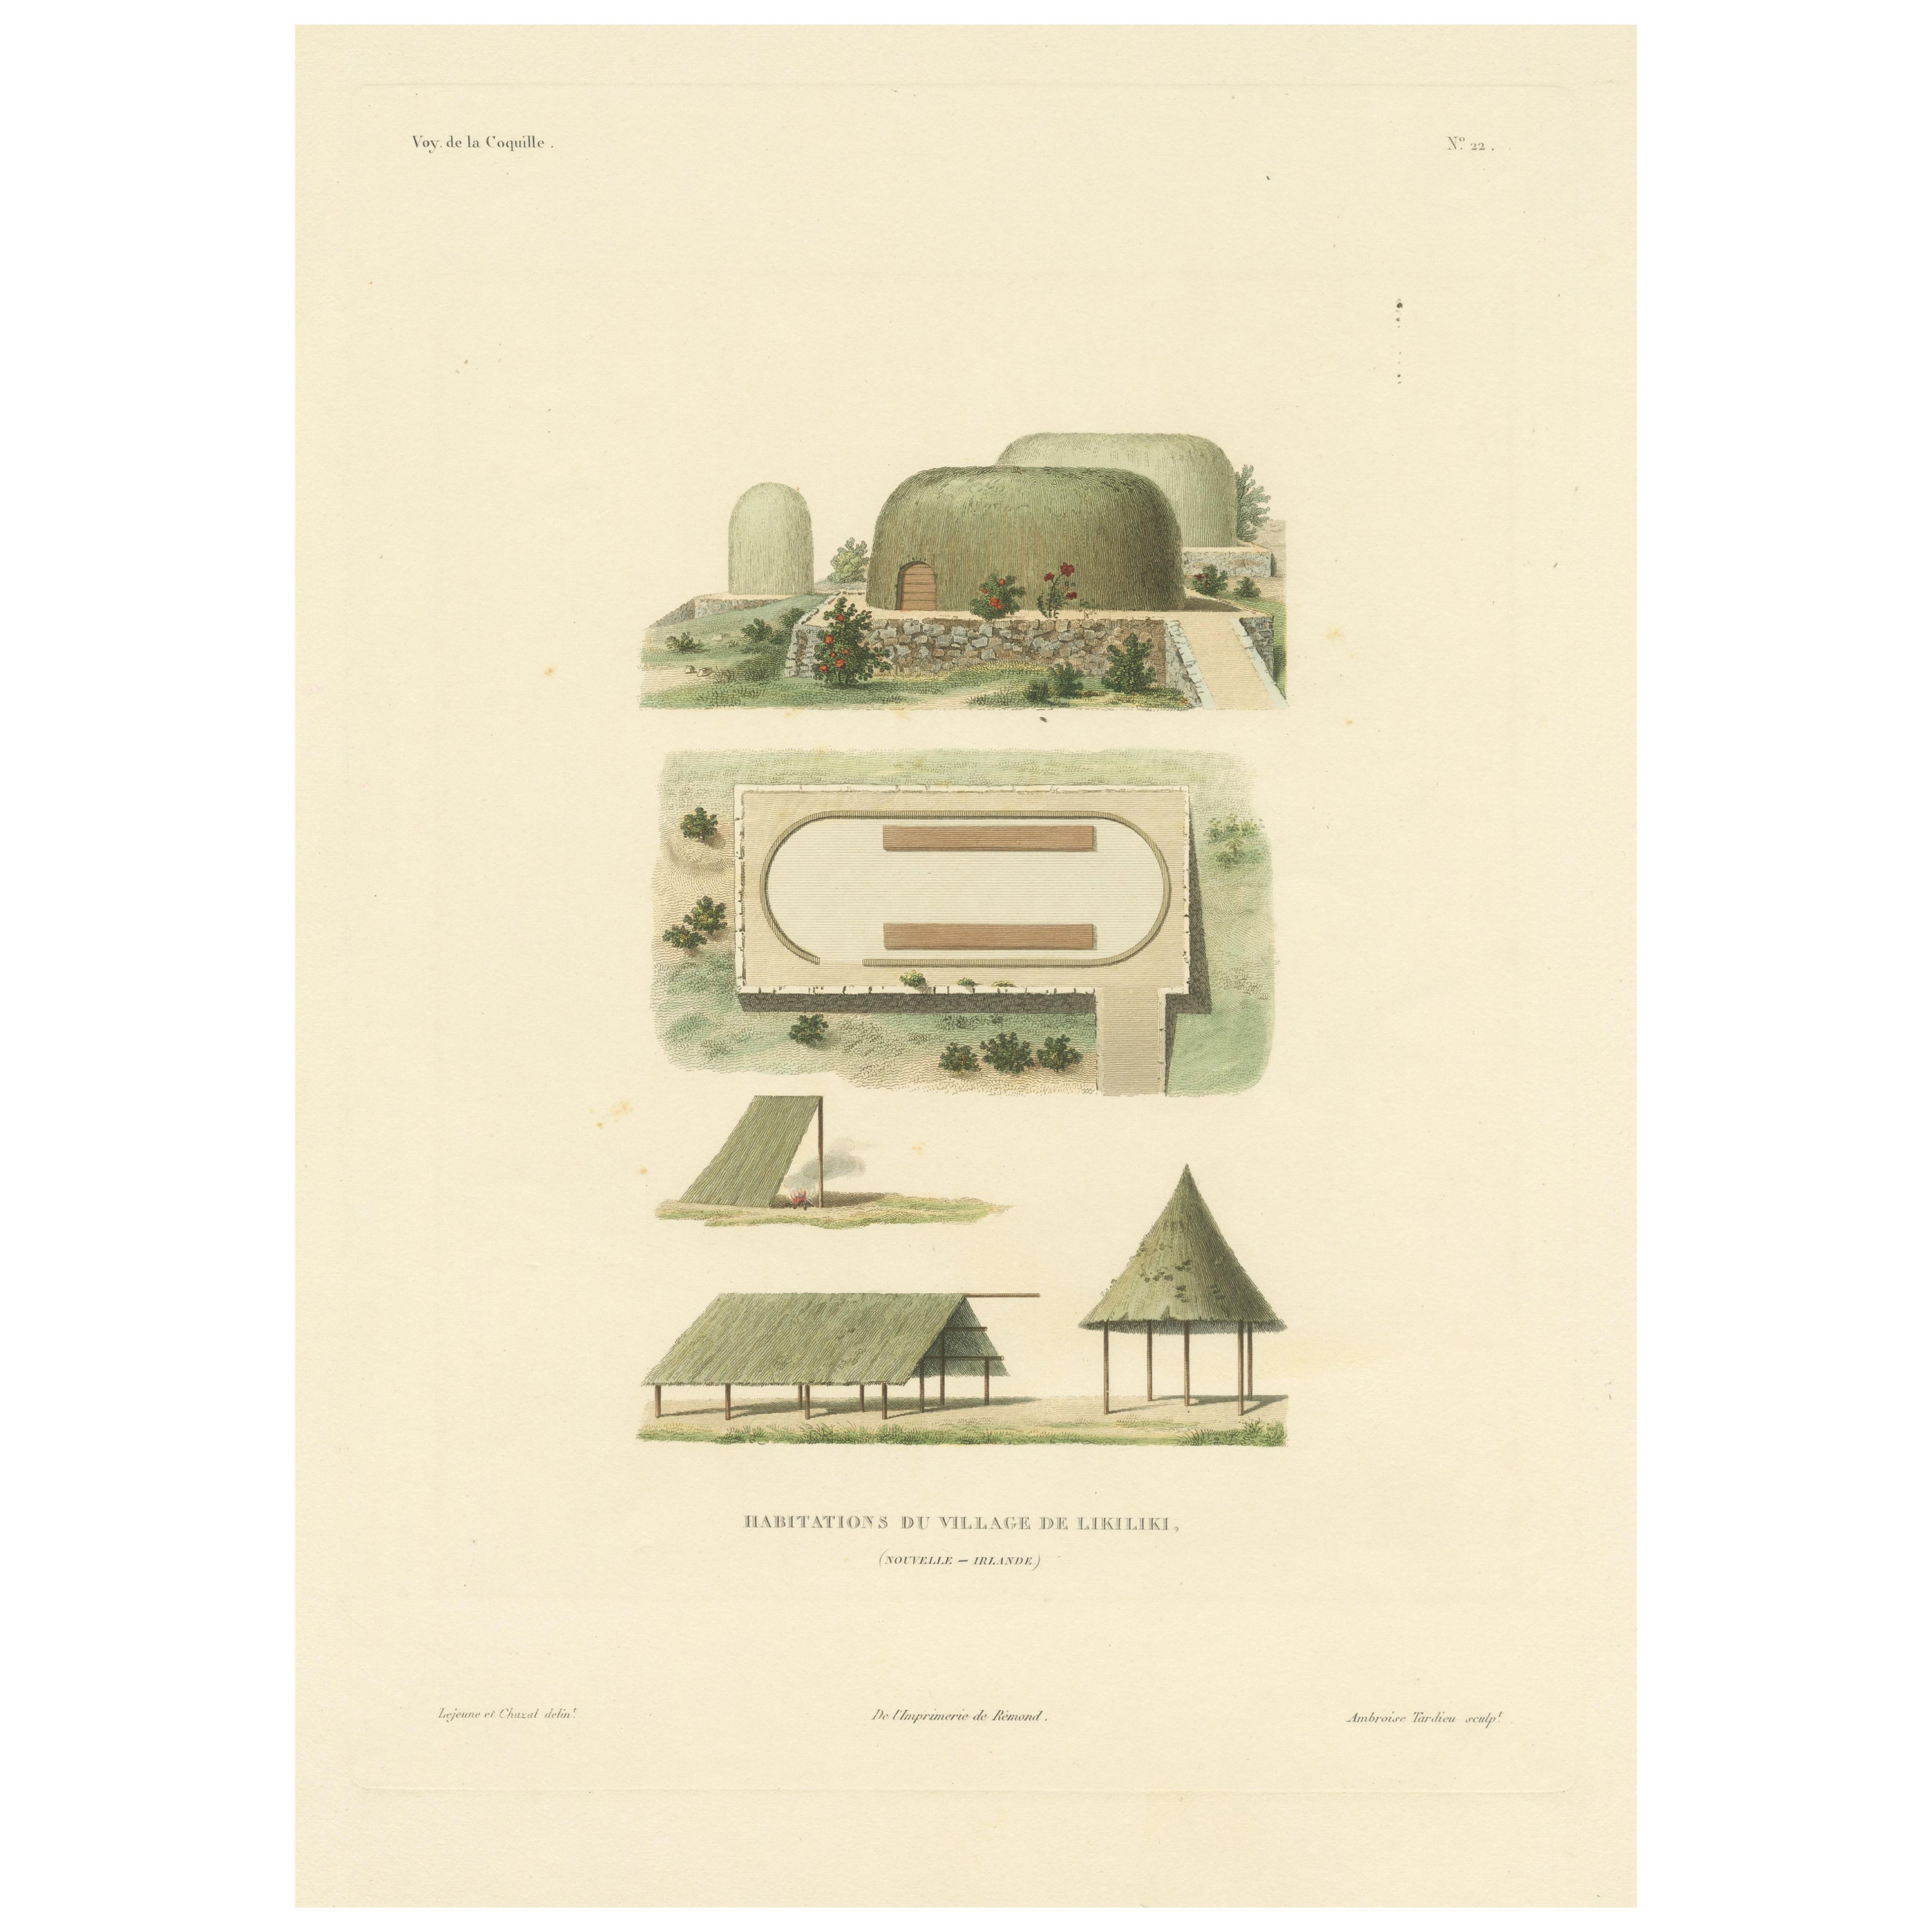 Antique Print of Dwellings in Likiliki Village, New Ireland For Sale